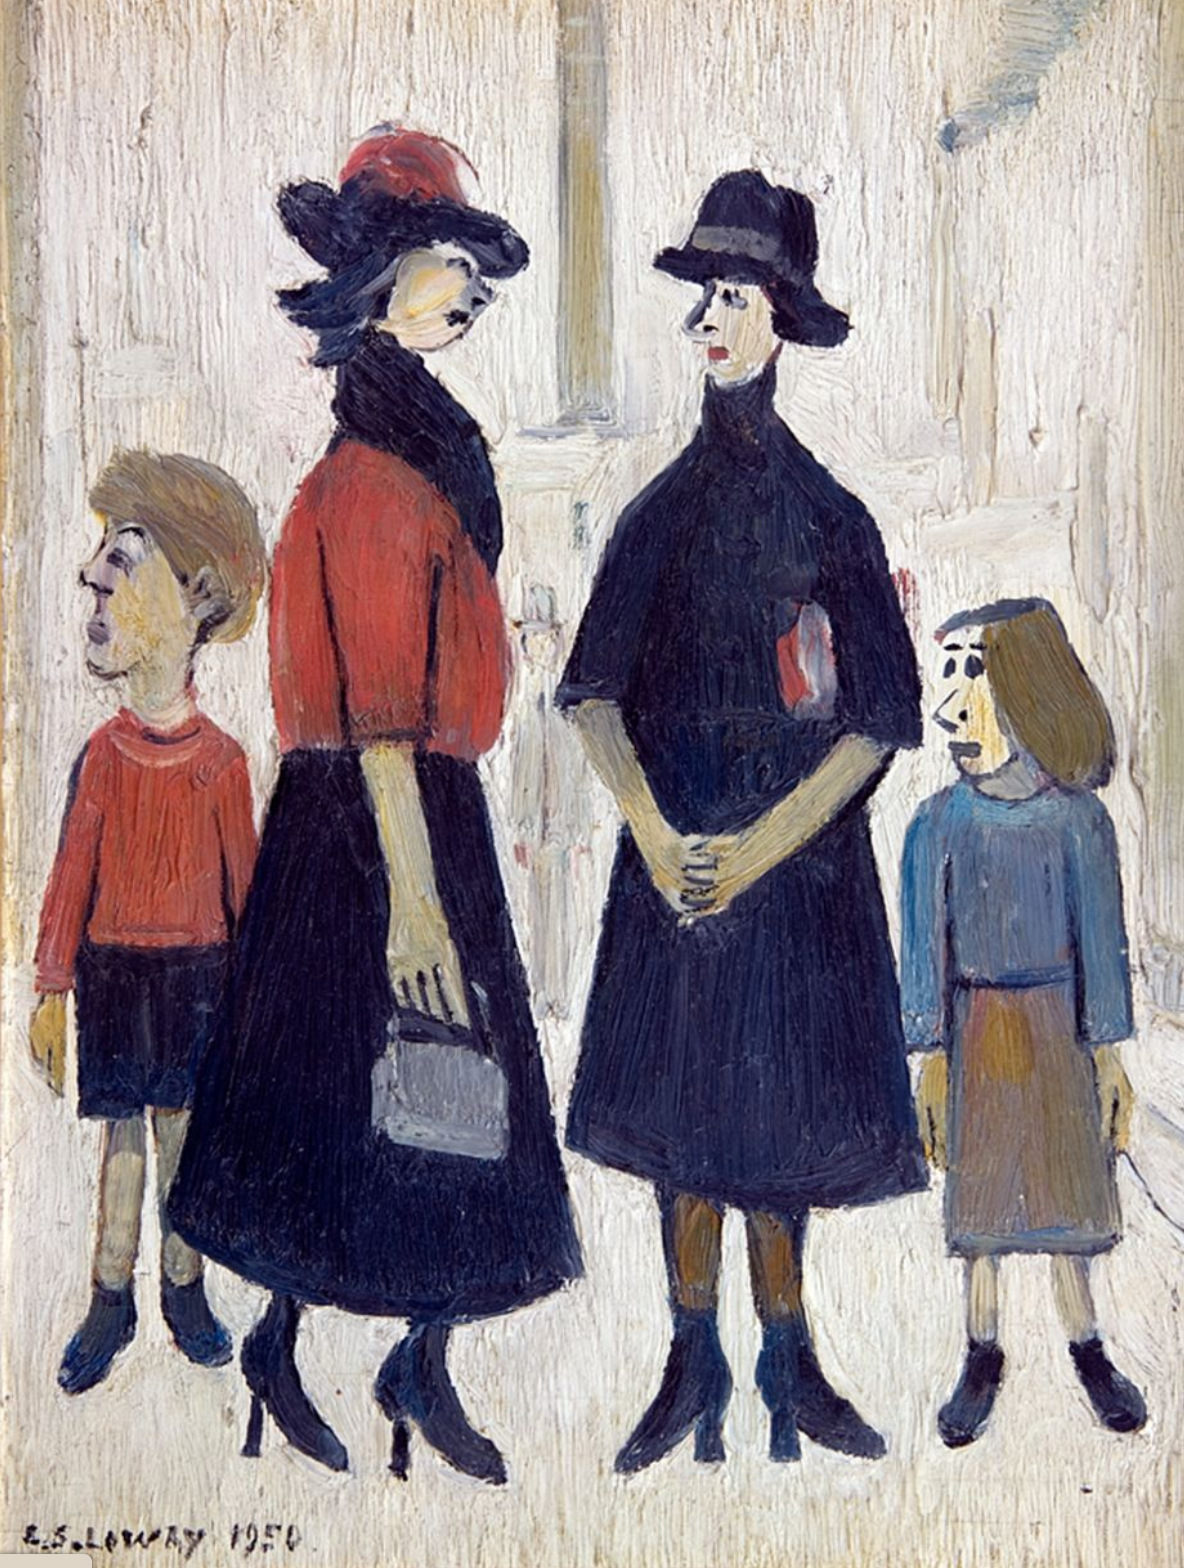 Two Women and Children (1950) by Laurence Stephen Lowry (1887 - 1976), English artist.